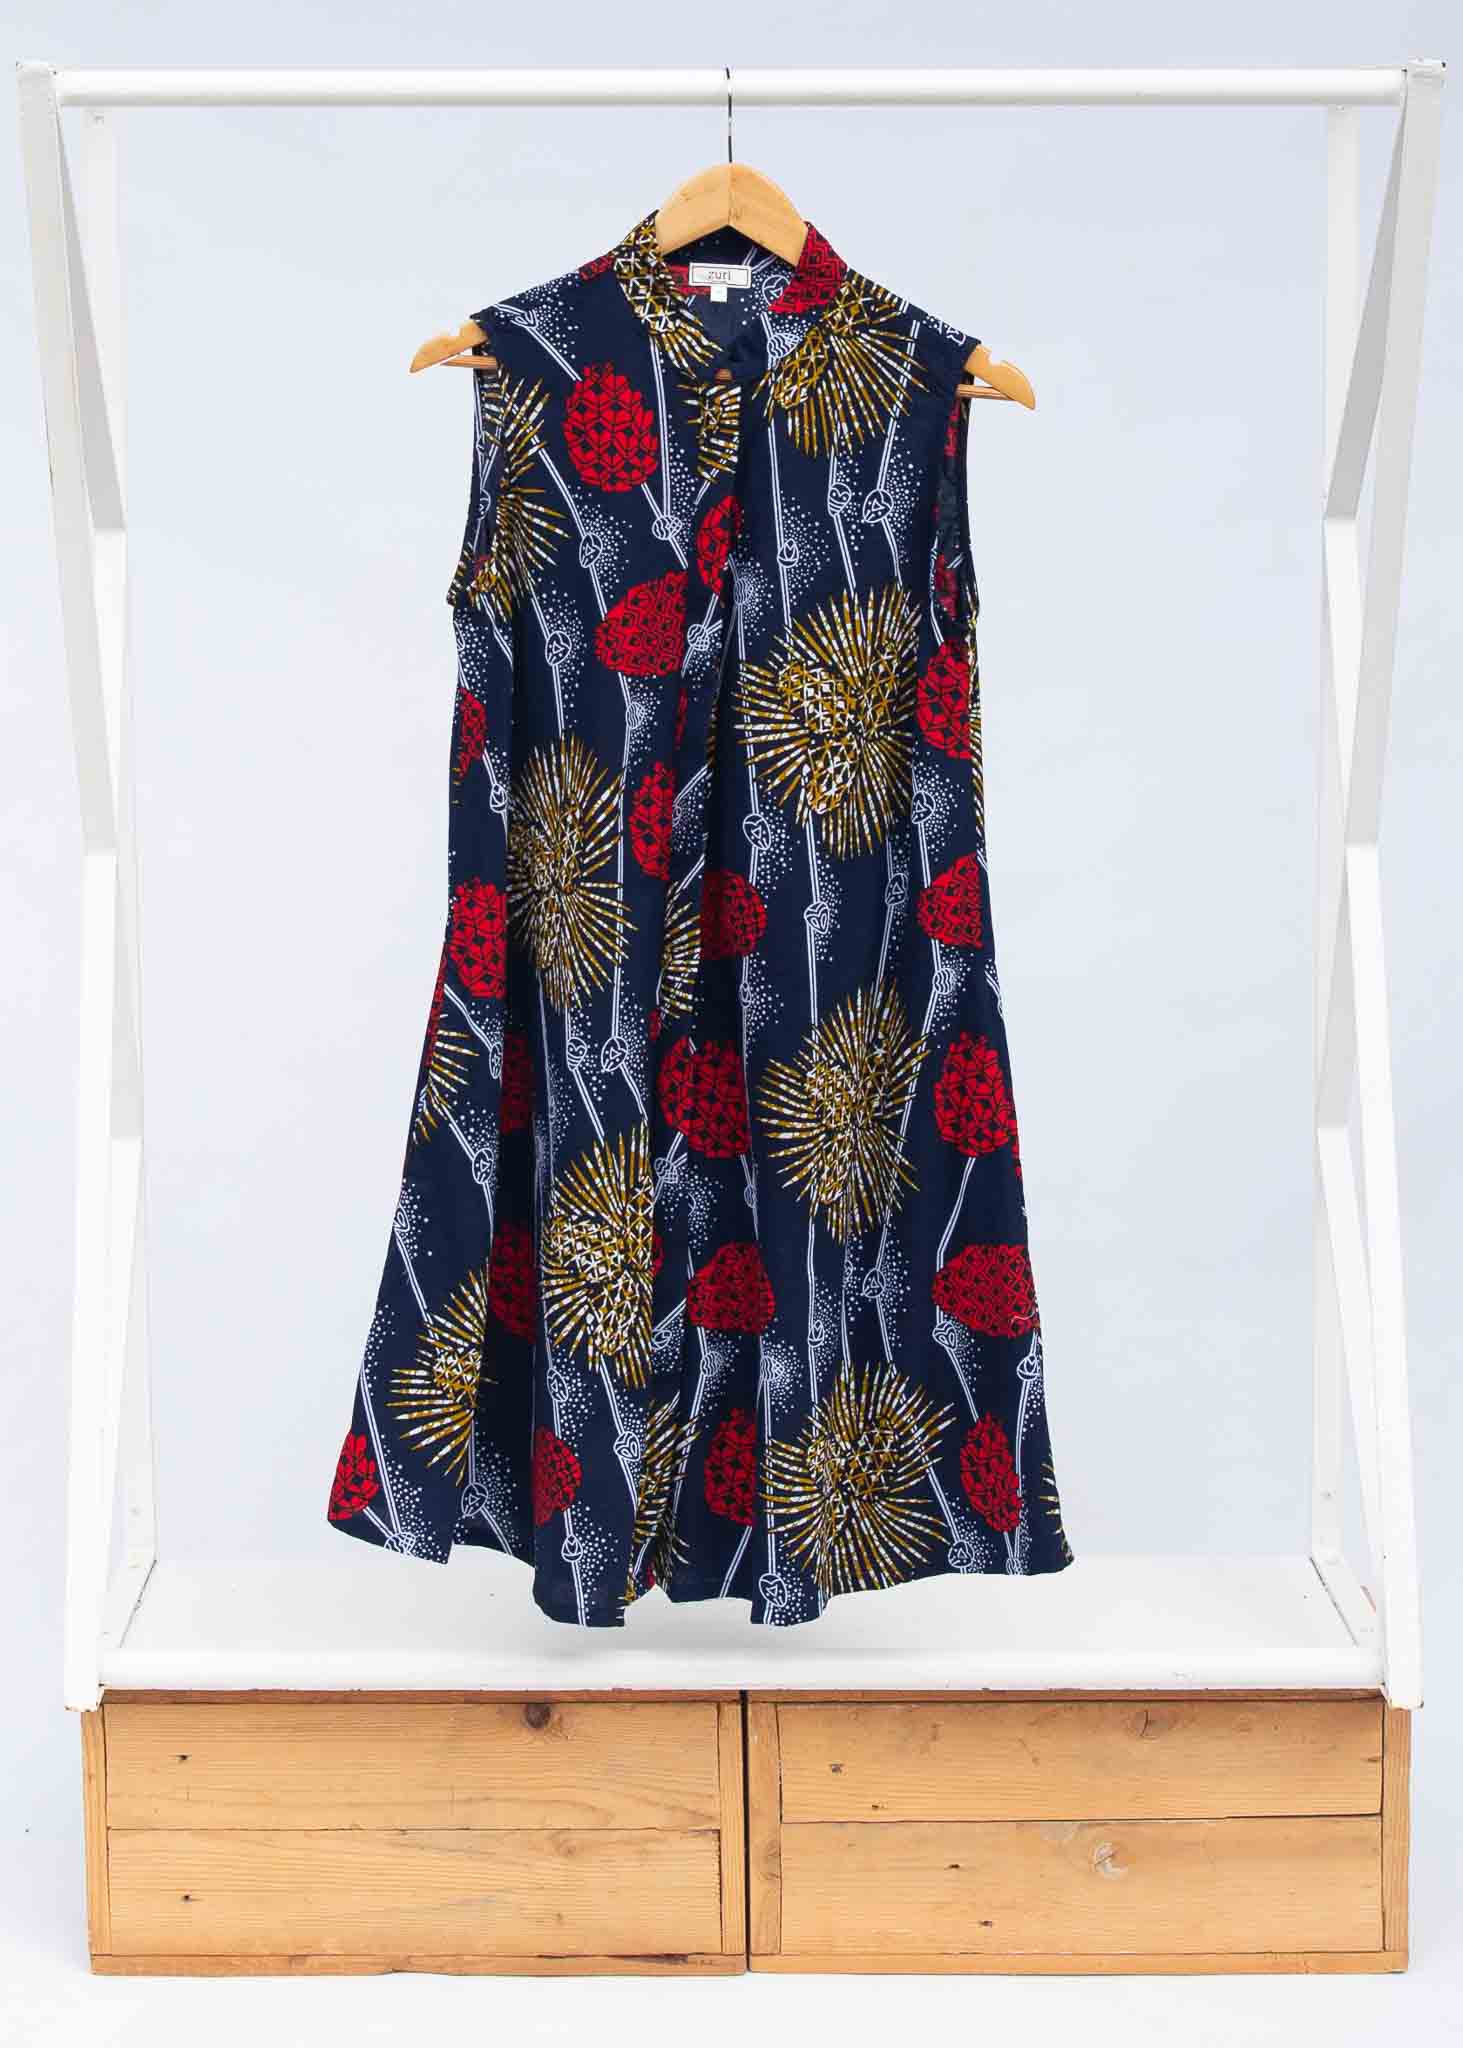 Display of navy sleeveless dress with red, yellow and white splatter print.